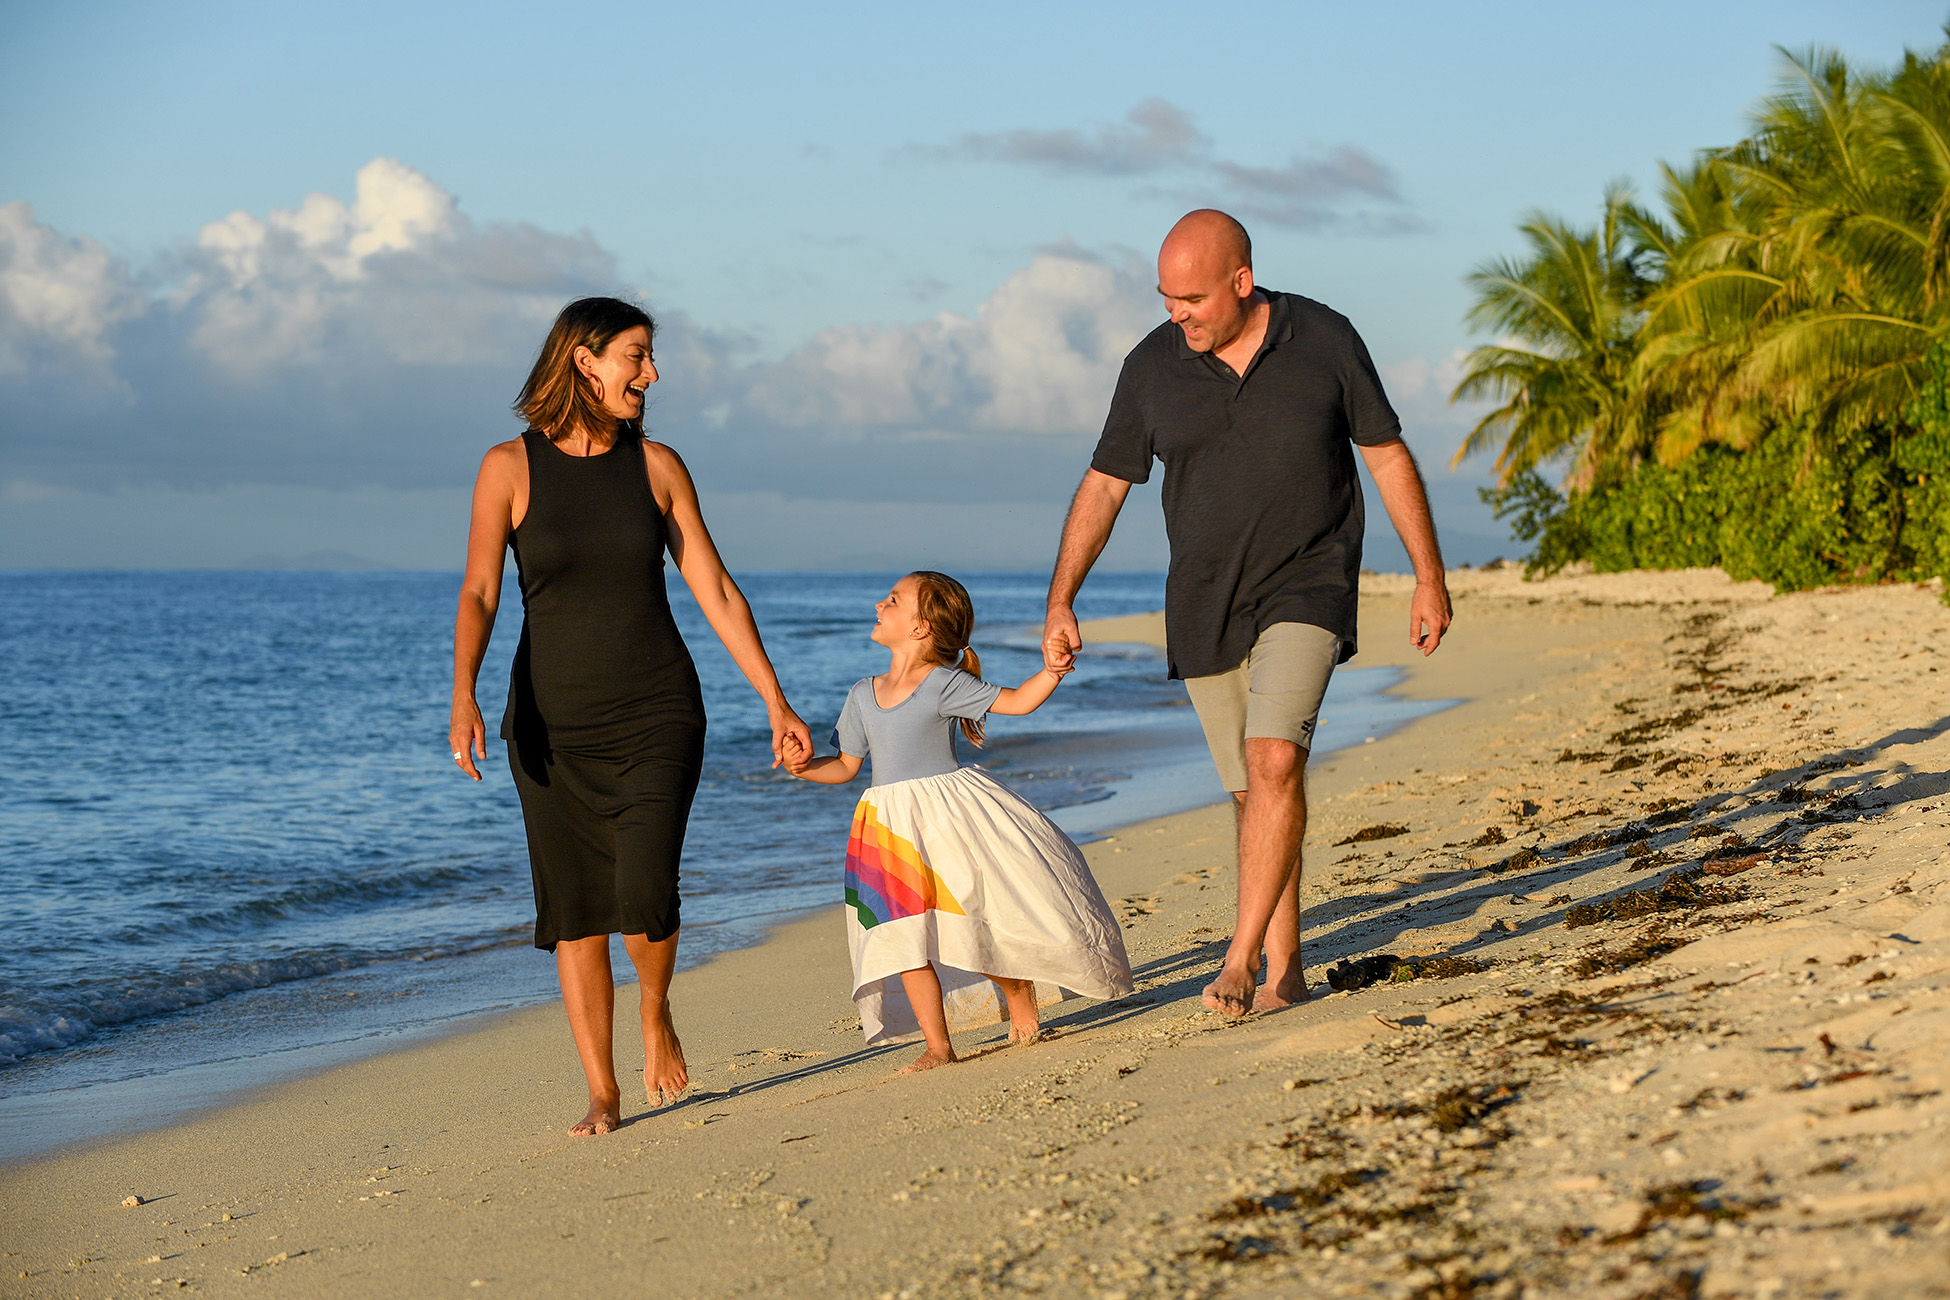 The cute family holds hands as they stroll on the beach